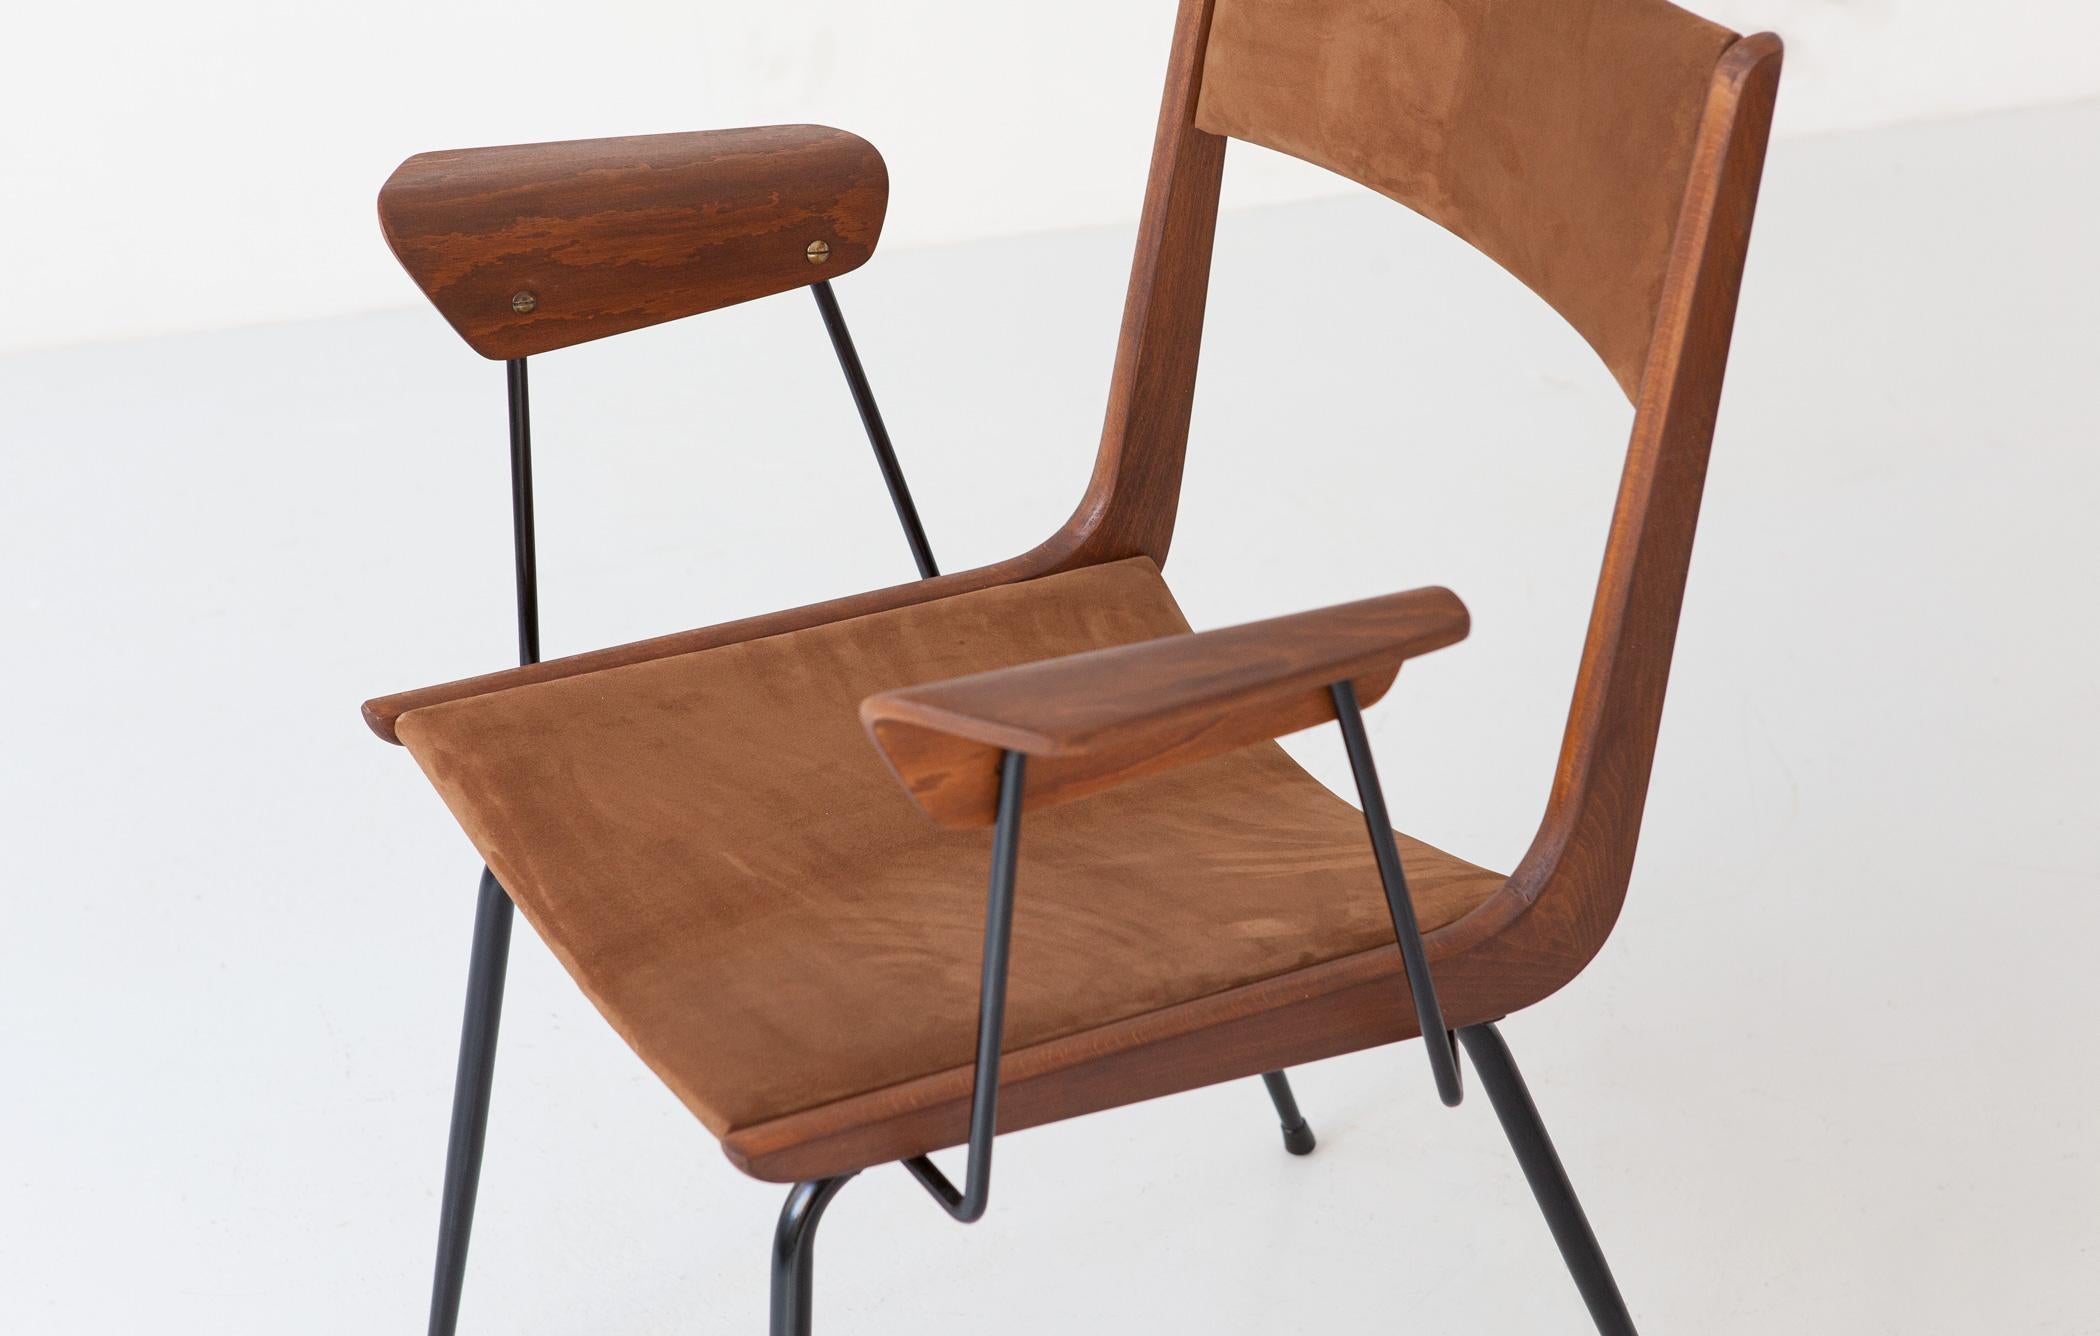 Italian Desk Chair by Carlo Ratti in Suede Leather, Fully Restored